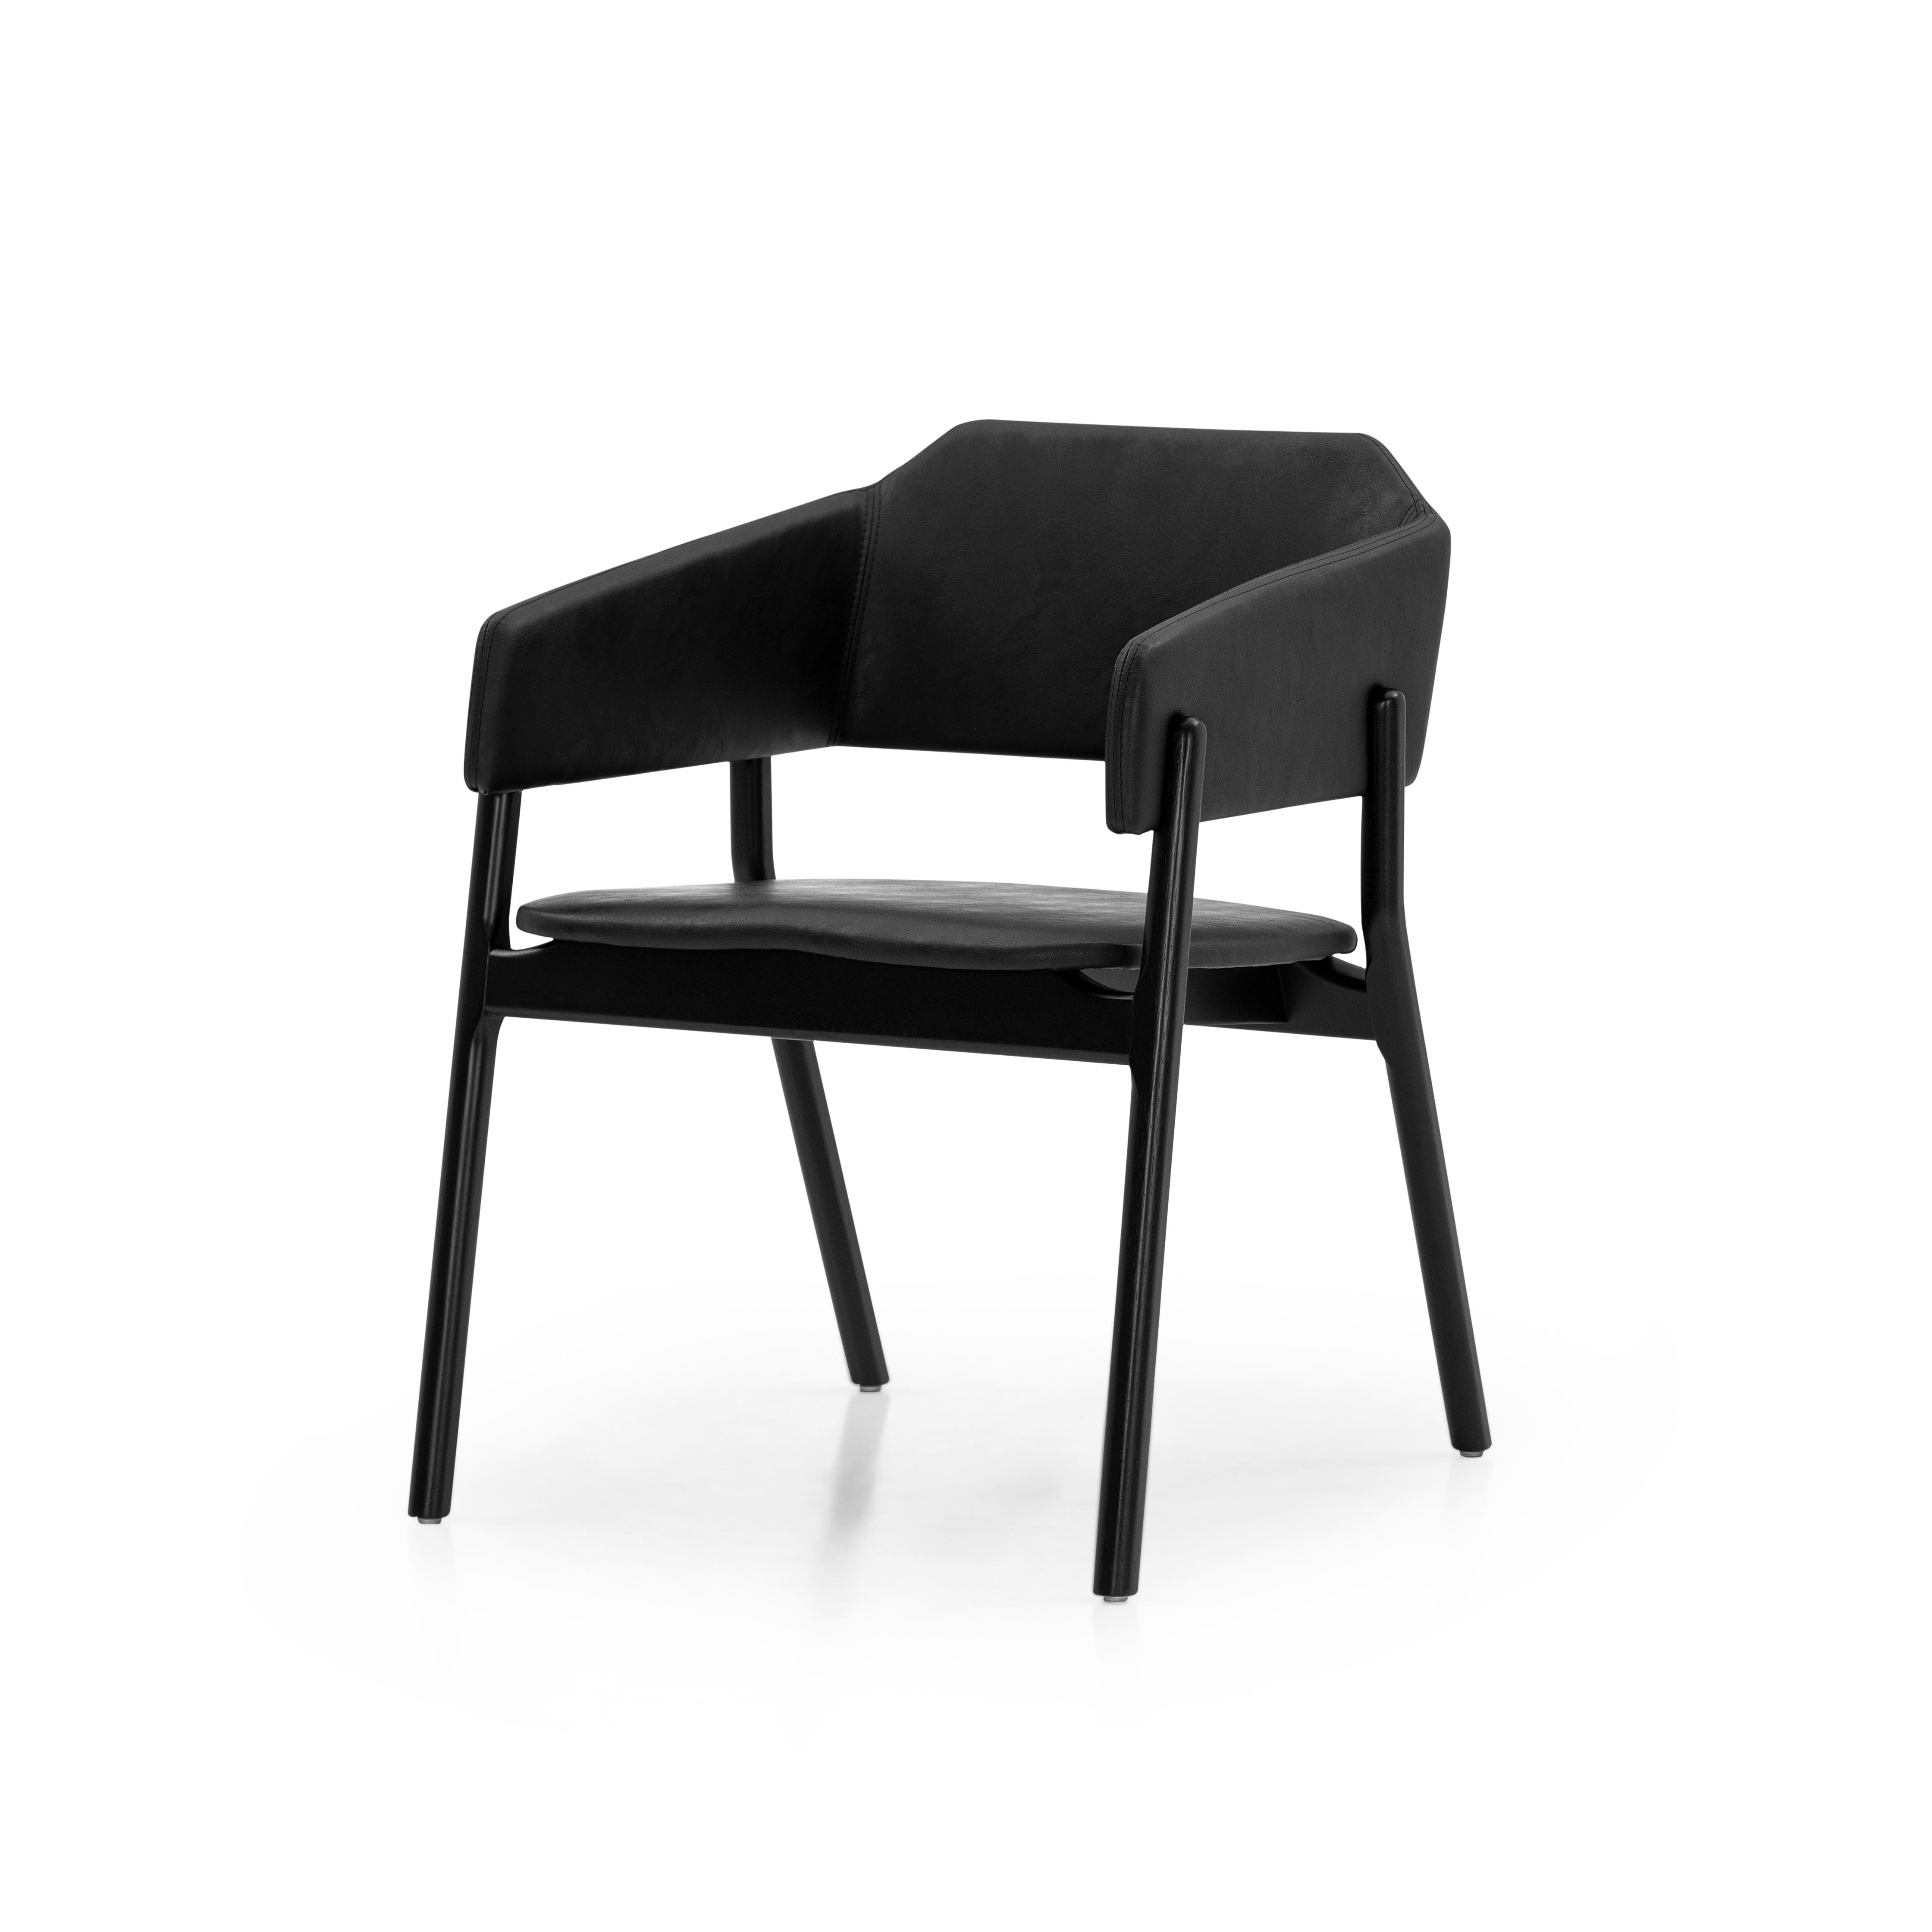 Our Uultis team has created this beautiful Stuzi dining chair to decorate your beautiful dining room table with a black fabric and black wood finish. This chair has a beautifully simple but elegant design that is going to perfectly go to combine